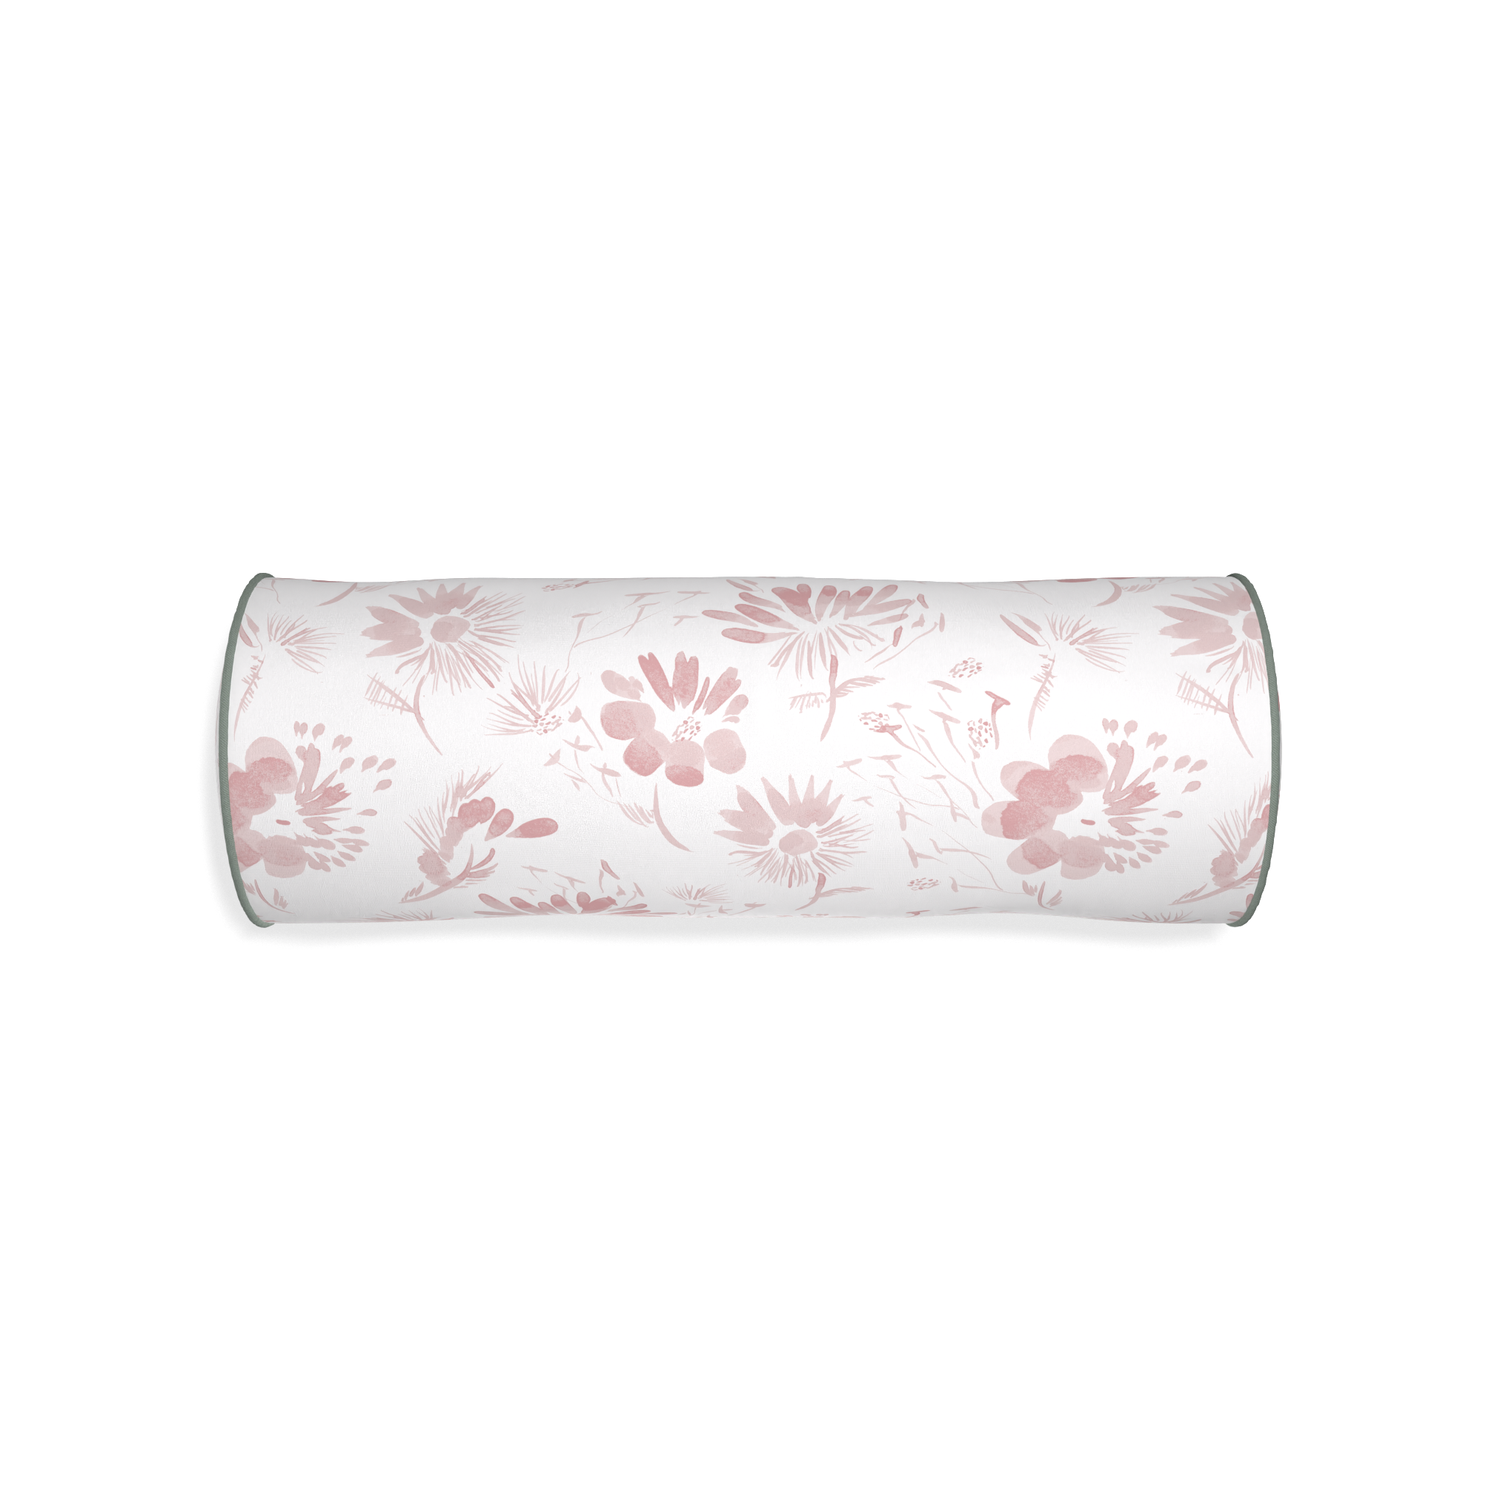 Bolster blake custom pink floralpillow with sage piping on white background